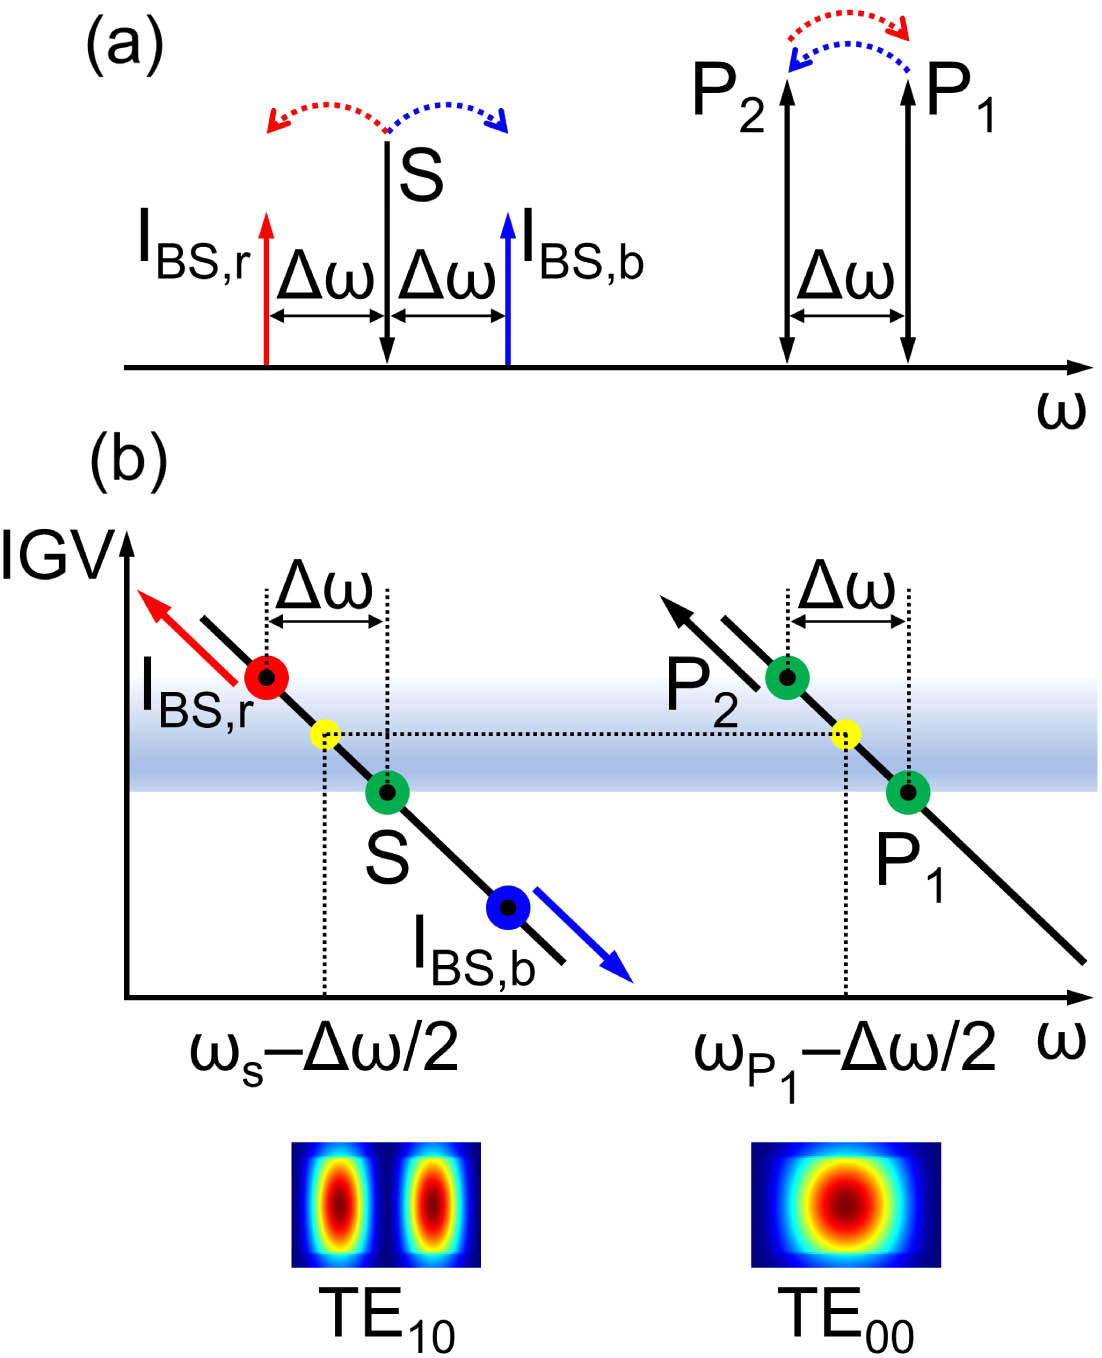 (a) Dual-pump BS FWM working principle. When two pumps (P1 and P2) and a seeding signal (S) are input into a third-order nonlinear waveguide, BS FWM can occur under the assumption that the phase matching condition is fulfilled. In this scenario, photons are scattered from the signal S to two idlers (IBS,b and IBS,r), with a simultaneous energy exchange between the two pumps. The solid arrows indicate the loss (down) and gain (up) of the photon energy, while the dashed arrows indicate the direction of the energy exchange for the IBS,r (red) and IBS,b (blue) cases. (b) Graphical illustration of the phase matching mechanism for the BS-IM-FWM scheme. If P1 and P2 are placed in the TE00 mode and the signal and idlers in the TE10 mode of a multimode waveguide, the phase matching condition can be satisfied and retained if it is possible to draw a horizontal line that crosses the IGV curves of the two considered modes at the average frequencies (yellow dots in the figure) of the two pumps and of the signal and one idler (either IBS,b or IBS,r).